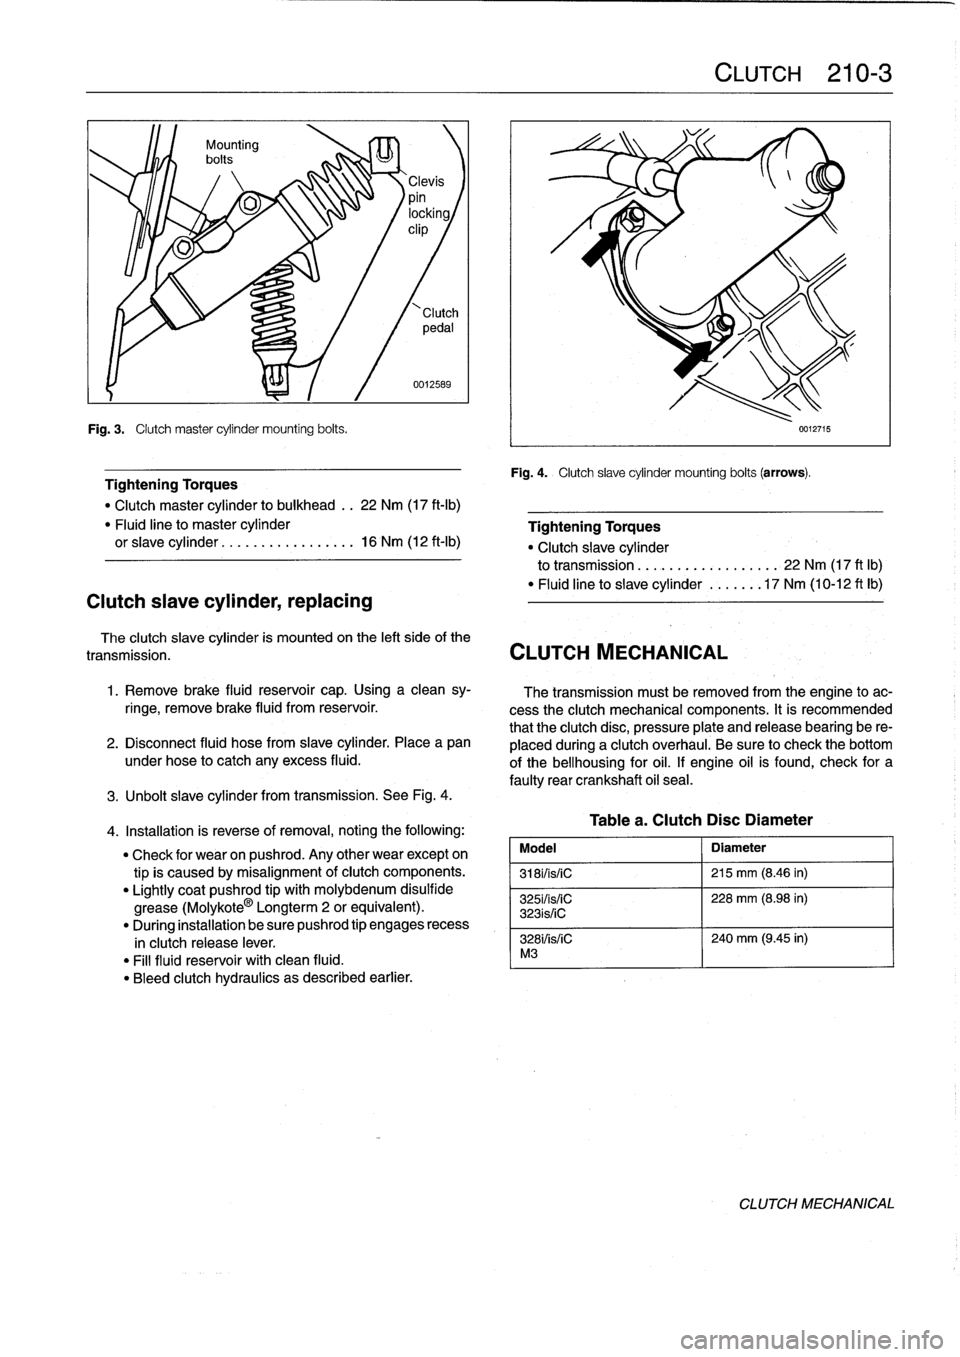 BMW 318i 1997 E36 User Guide Fig
.
3
.

	

Clutch
master
cylinder
mounting
bolts
.

Clutch
slave
cylinder,
replacing

0012589

Tightening
Torques

"
Clutch
master
cylinder
to
bulkhead
..
22
Nm
(17
ft-Ib)
"
Fluid
line
to
master
cy